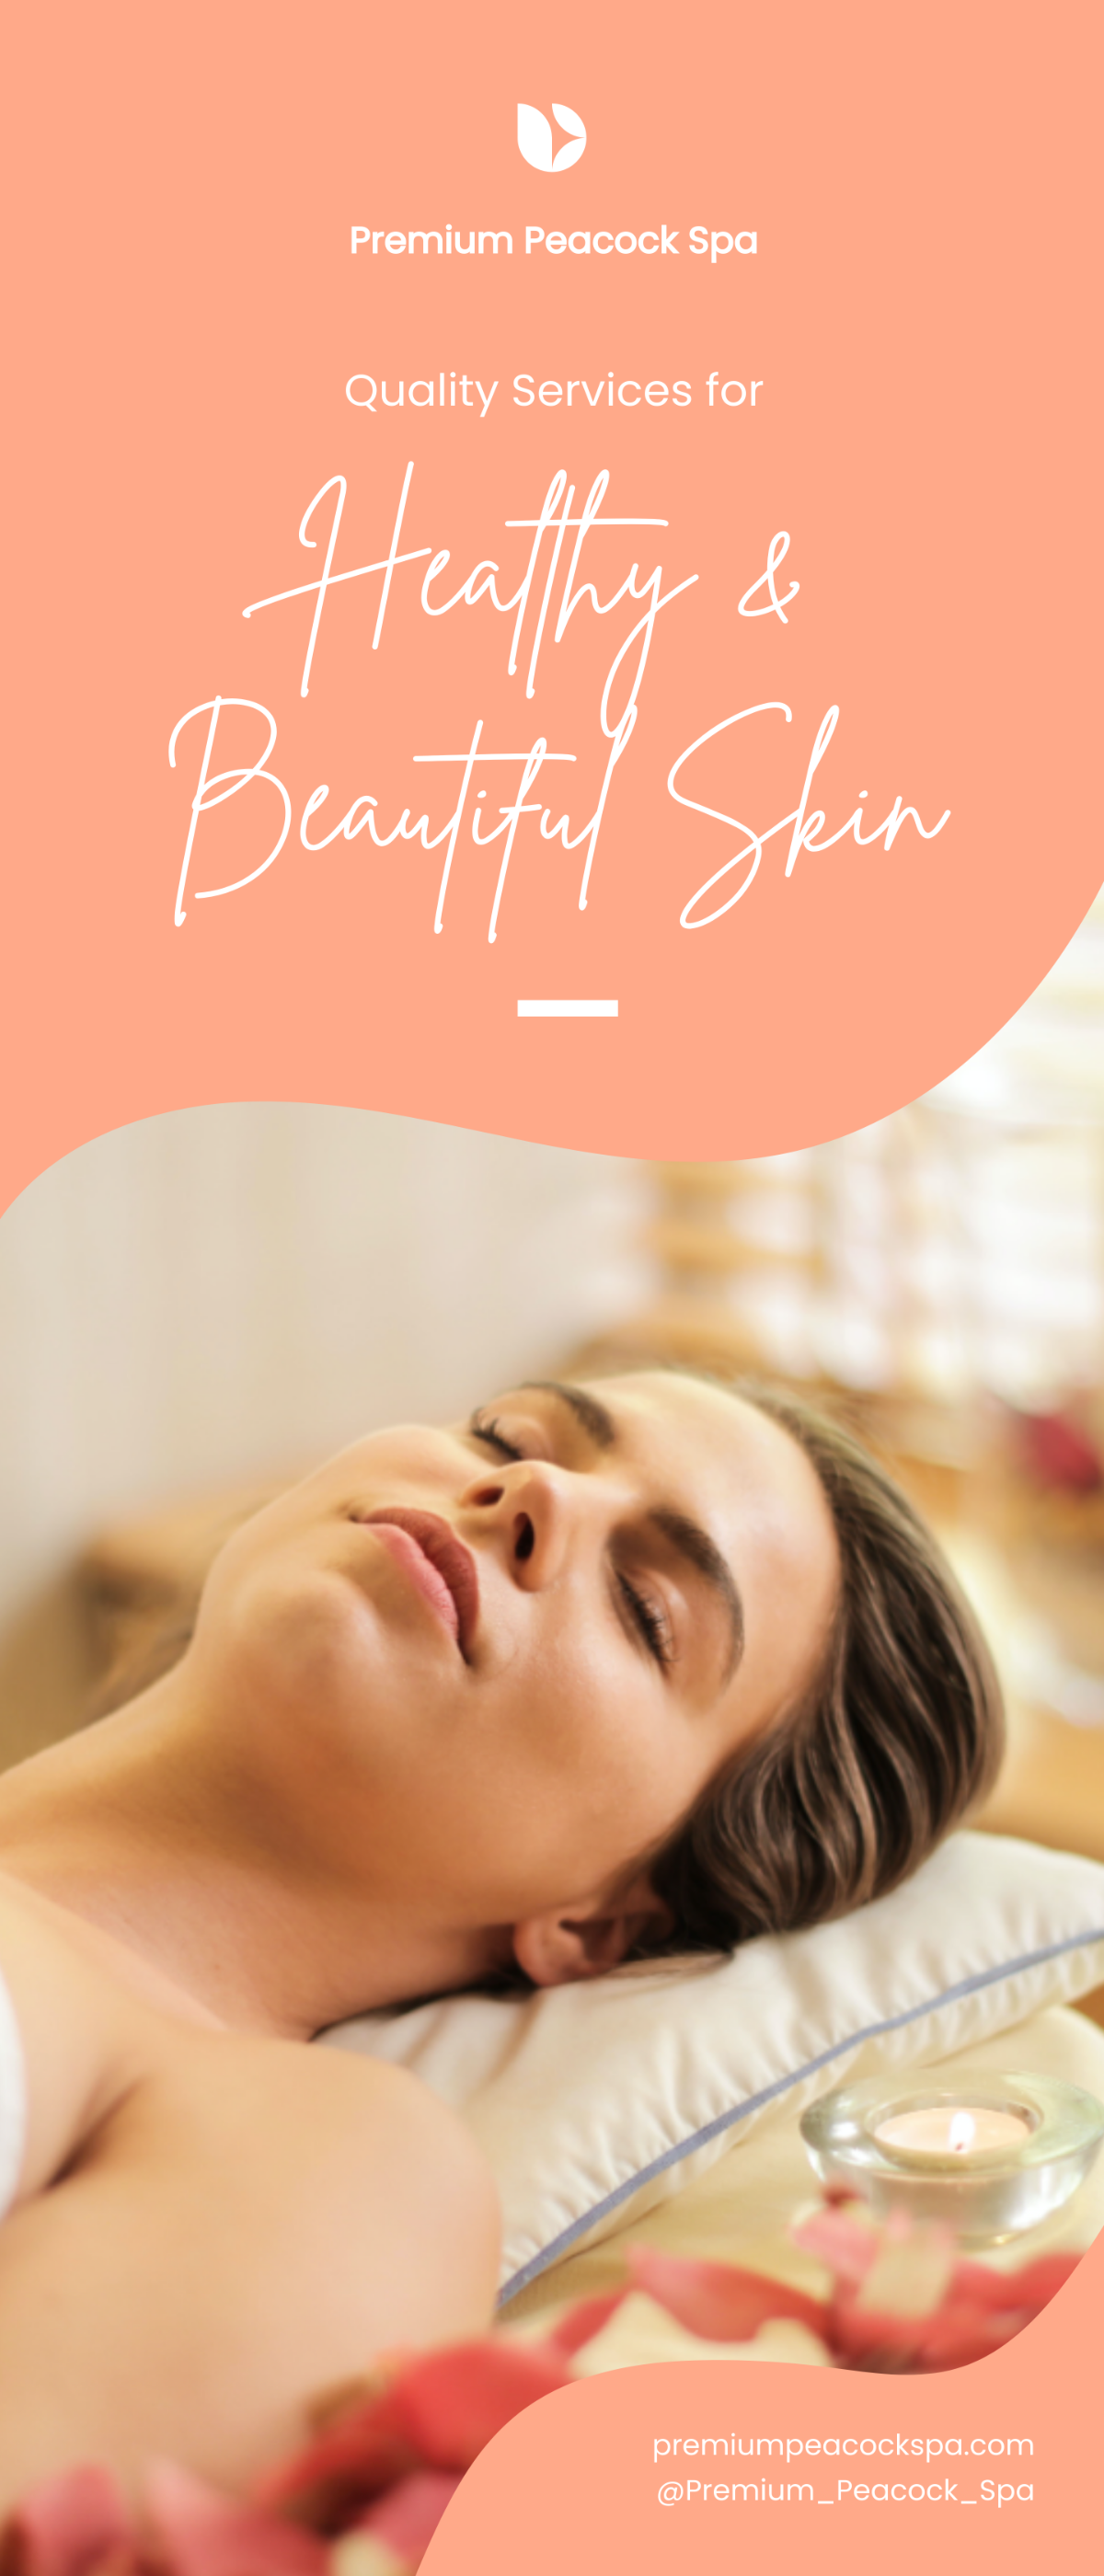 Free Spa Beauty Roll Up Banner Template